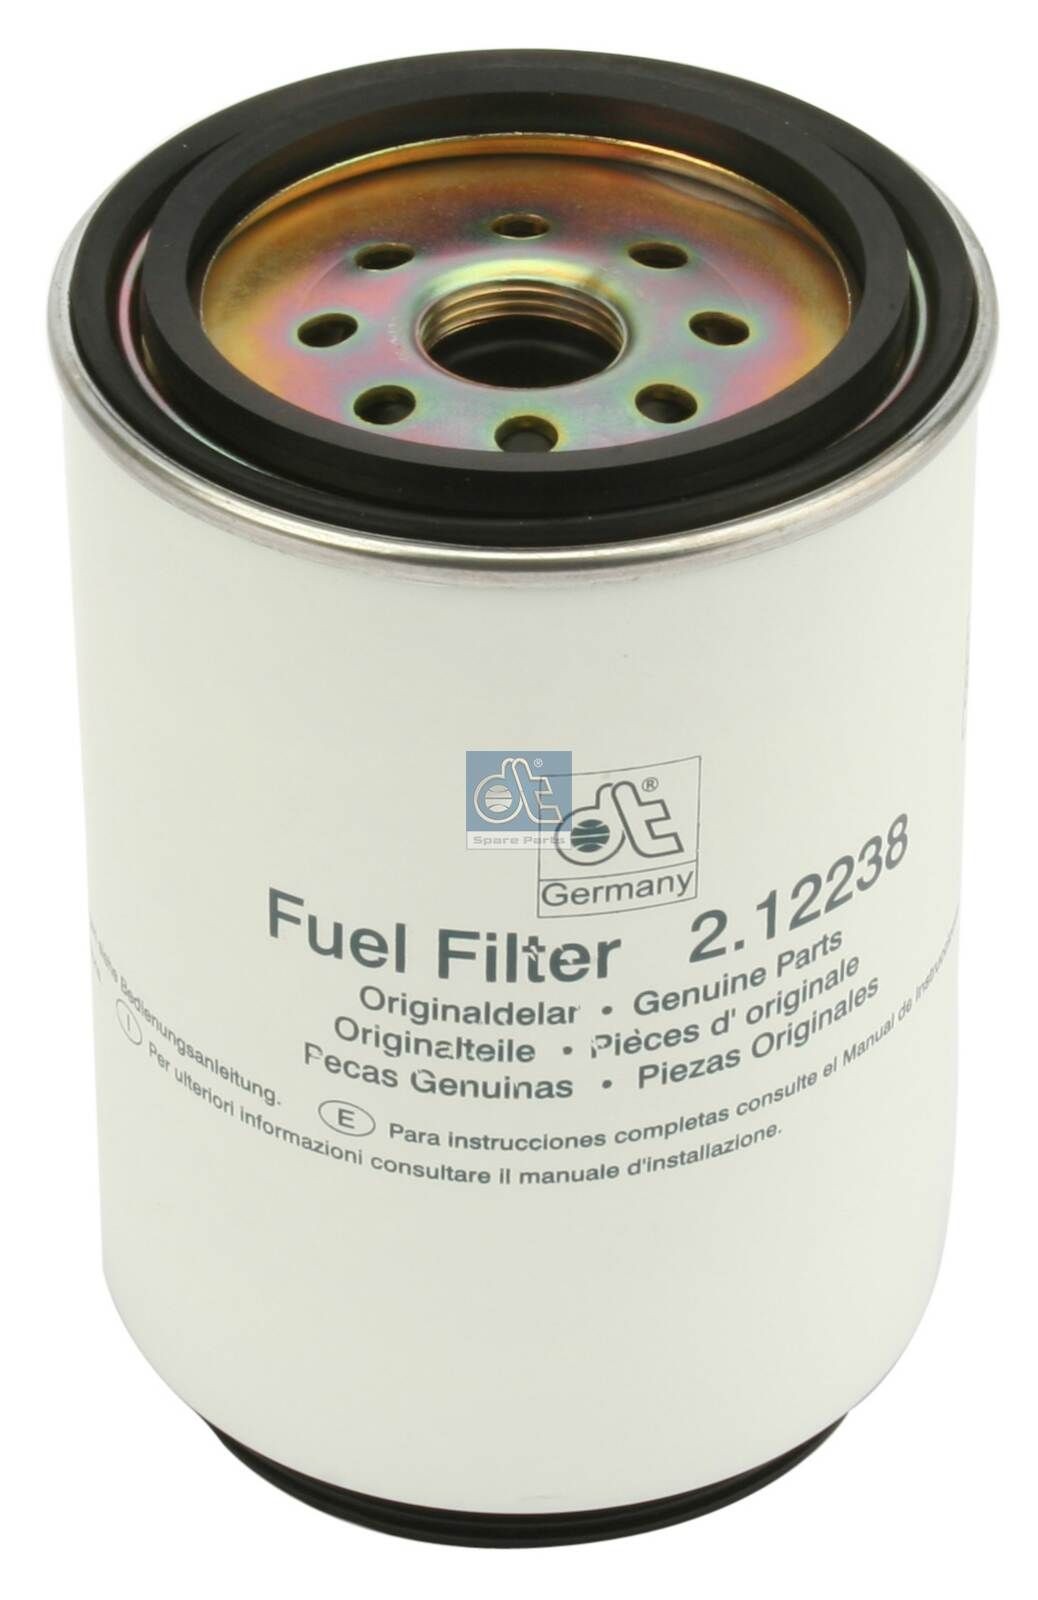 WK 1060/5 x DT Spare Parts 2.12238 Fuel filter 211200010